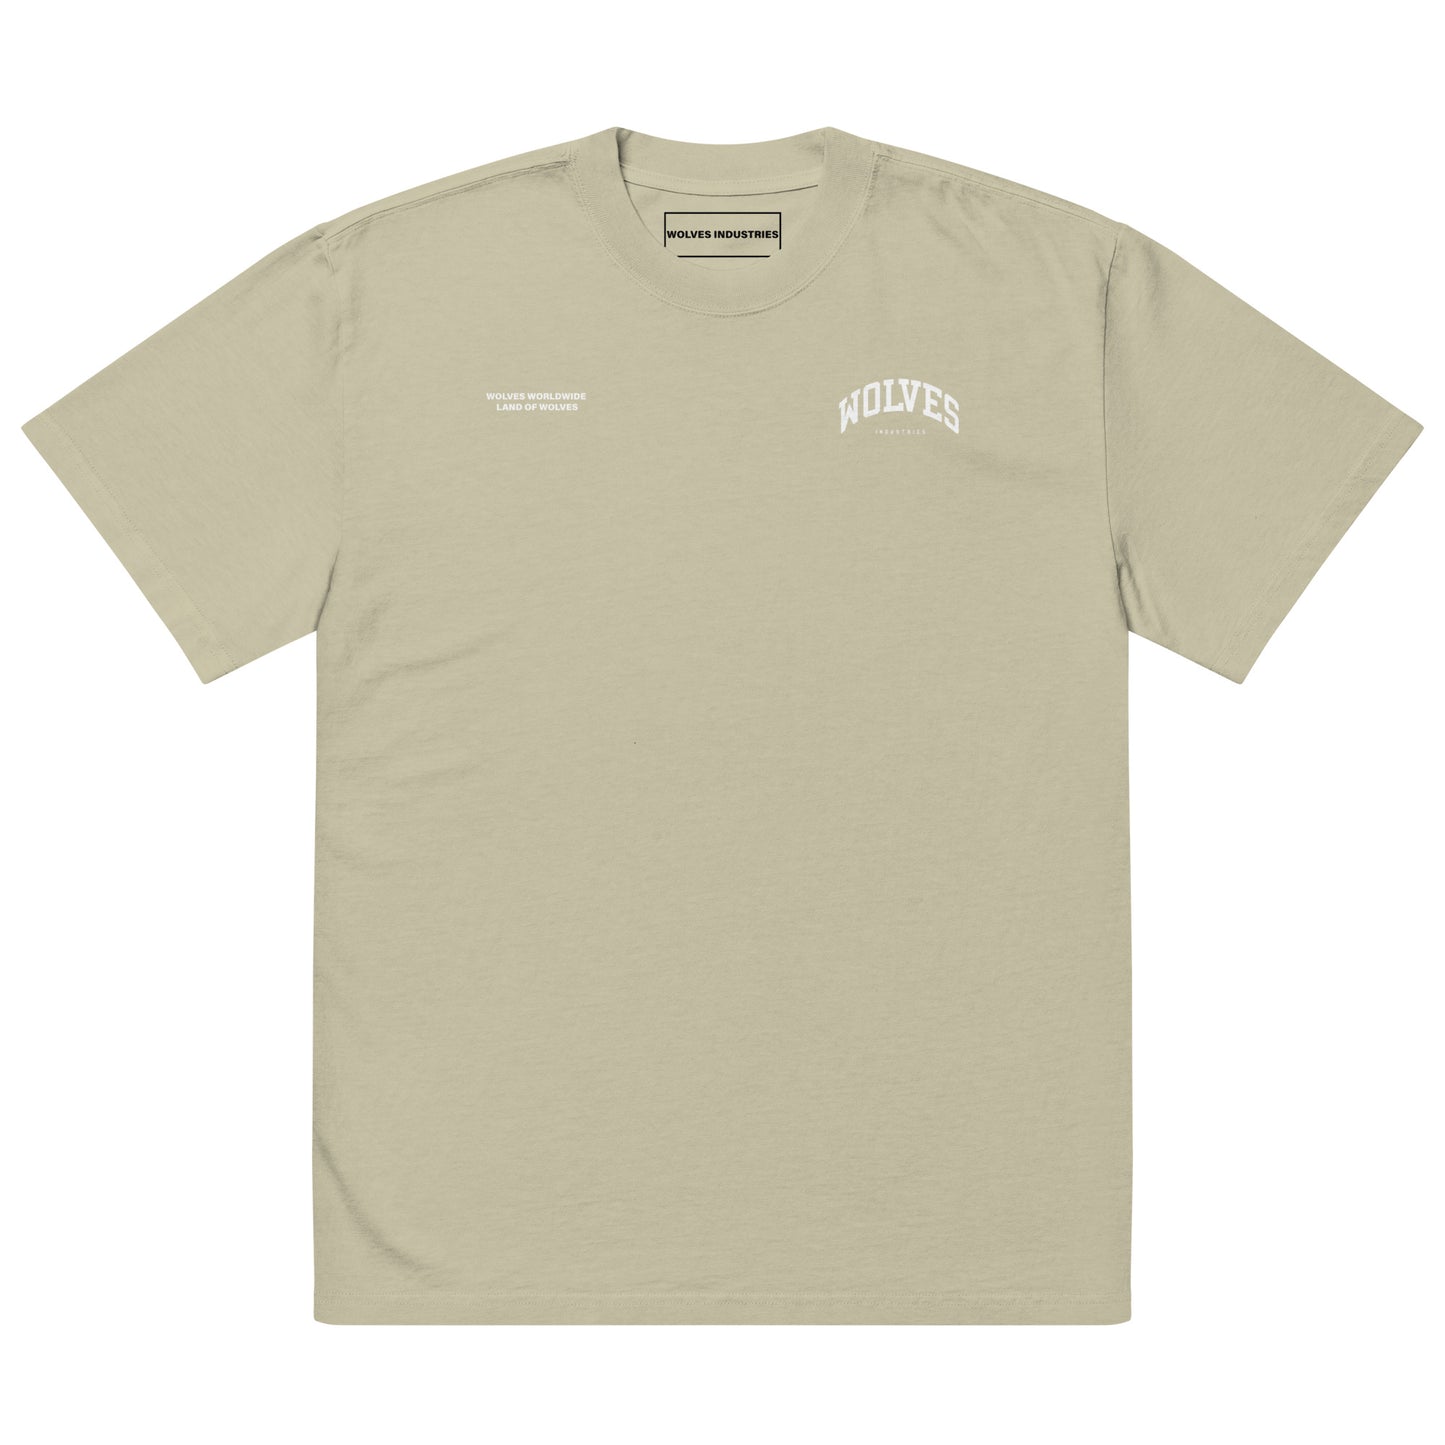 Wolves Industries ABM Oversized faded t-shirt